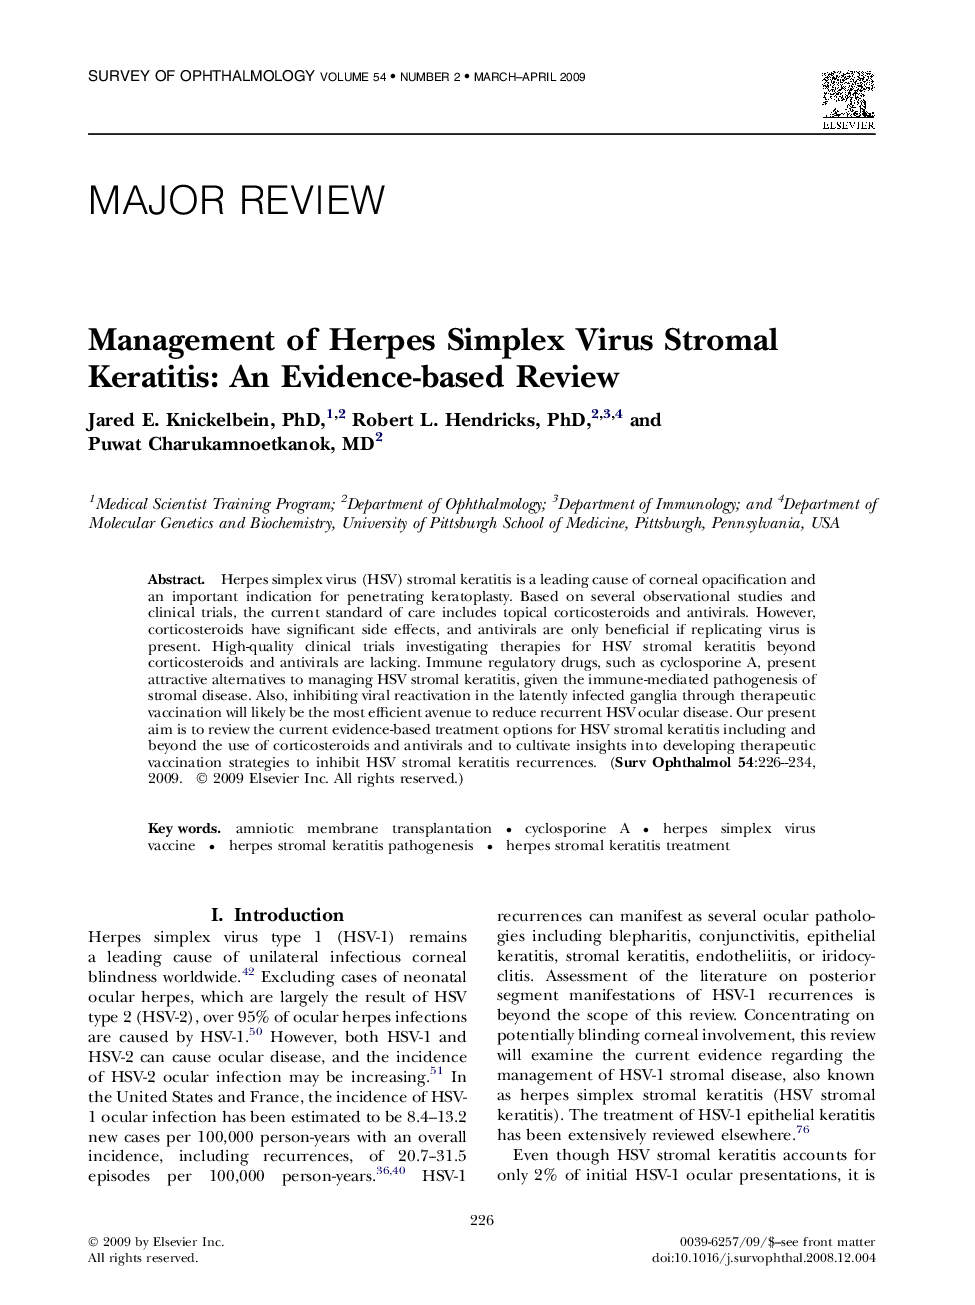 Management of Herpes Simplex Virus Stromal Keratitis: An Evidence-based Review 